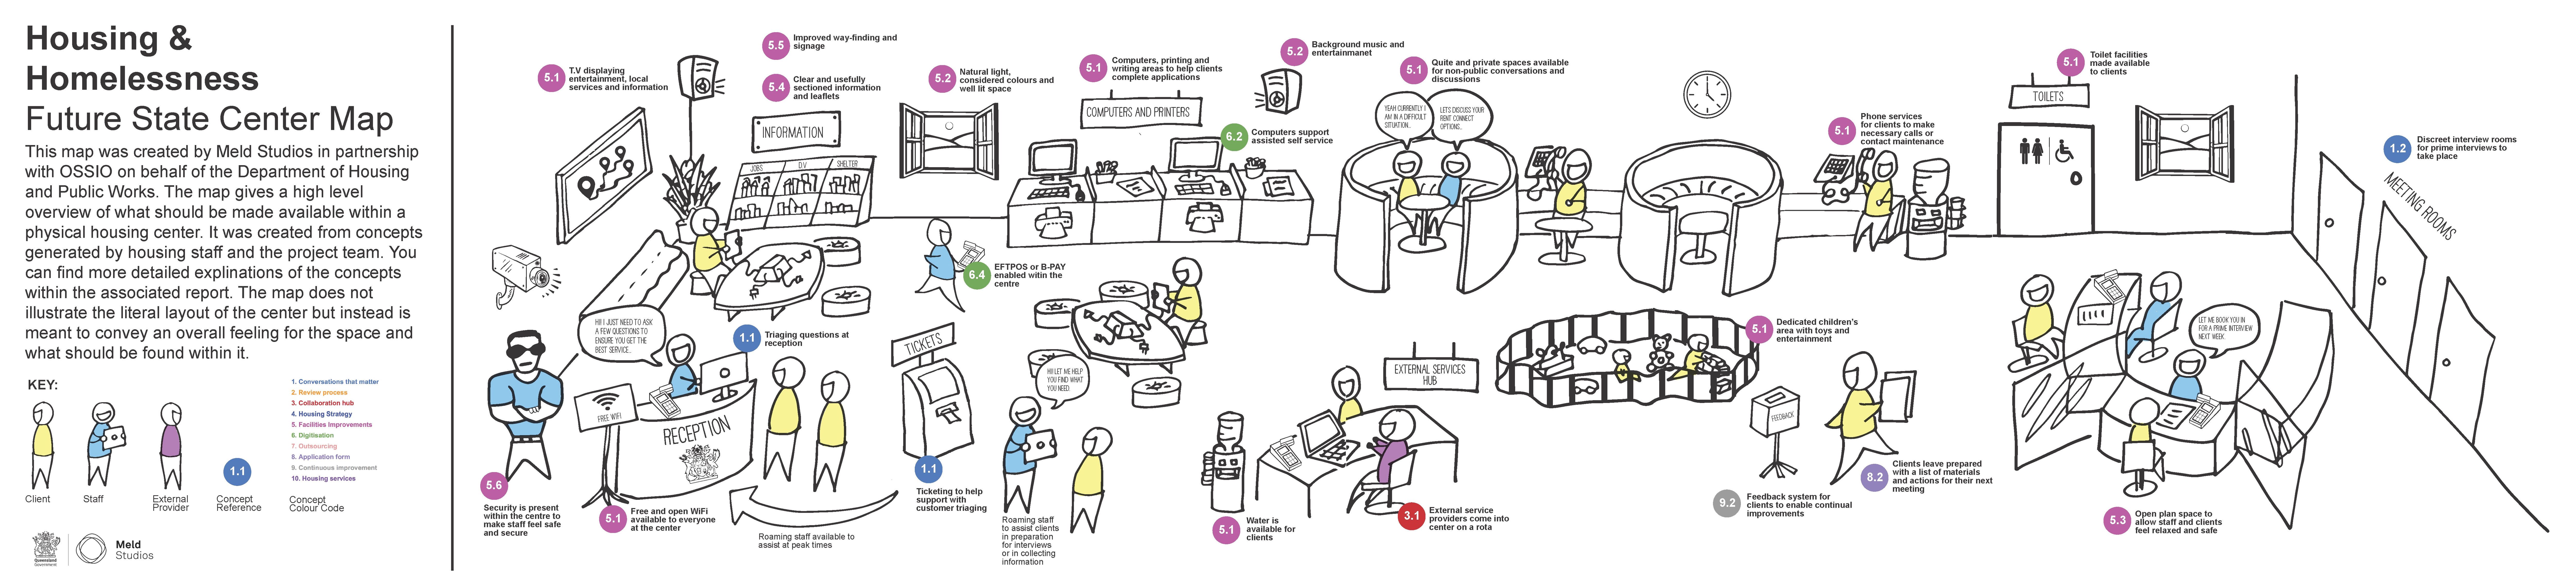 Housing and Homelessness future state journey map. It gives a high-level overview of the new features to be made available within a physical housing centre, developed from concepts generated by housing staff and project team.